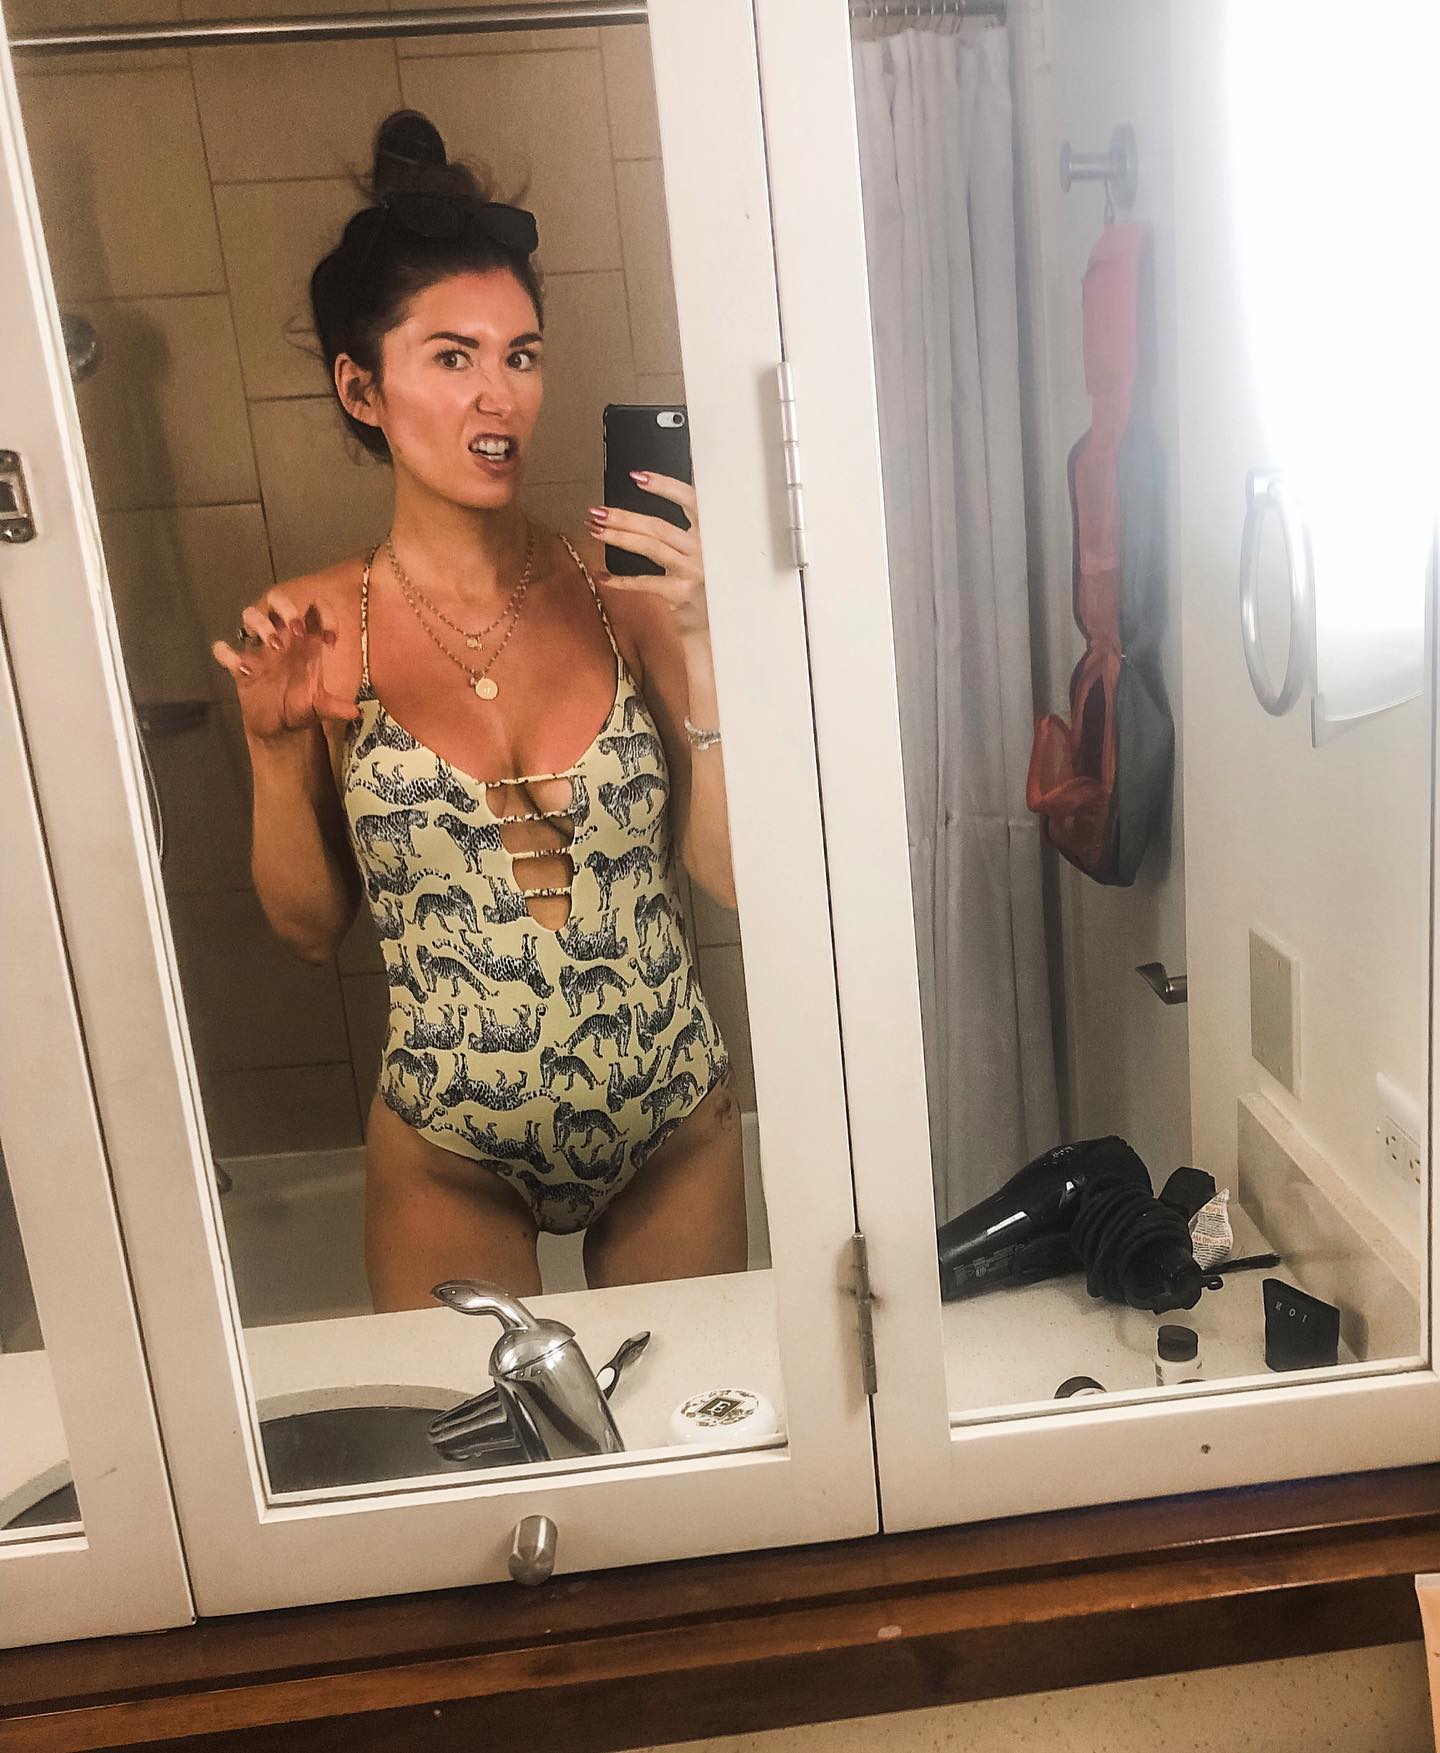 Jewel Staite From Her IG